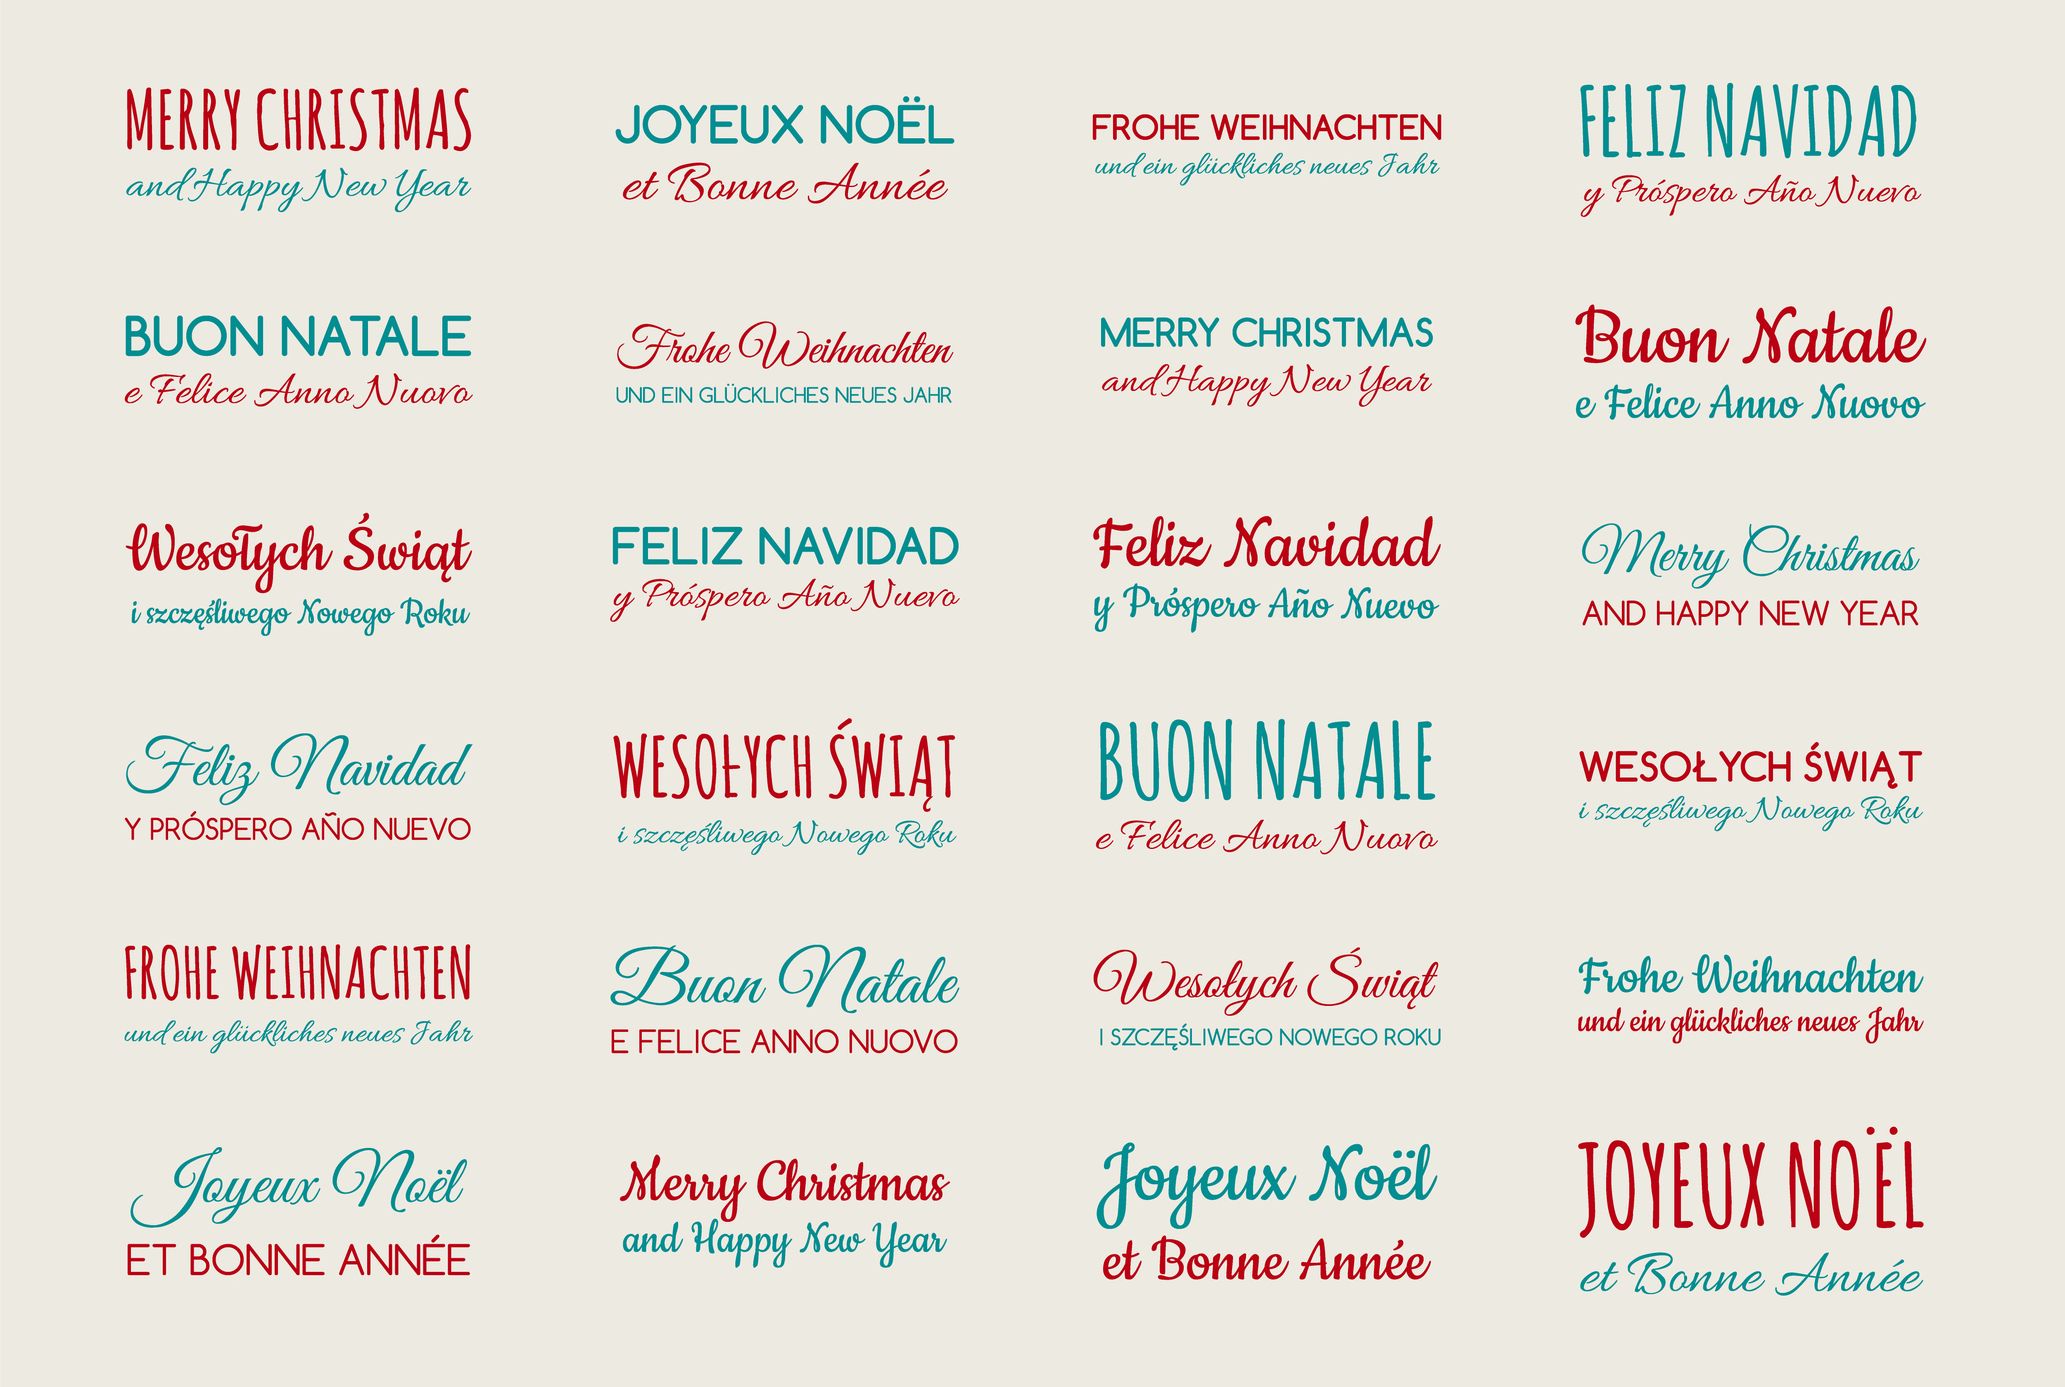 Buon Natale How To Pronounce It.How To Say Merry Christmas In 26 Different Languages Mental Floss